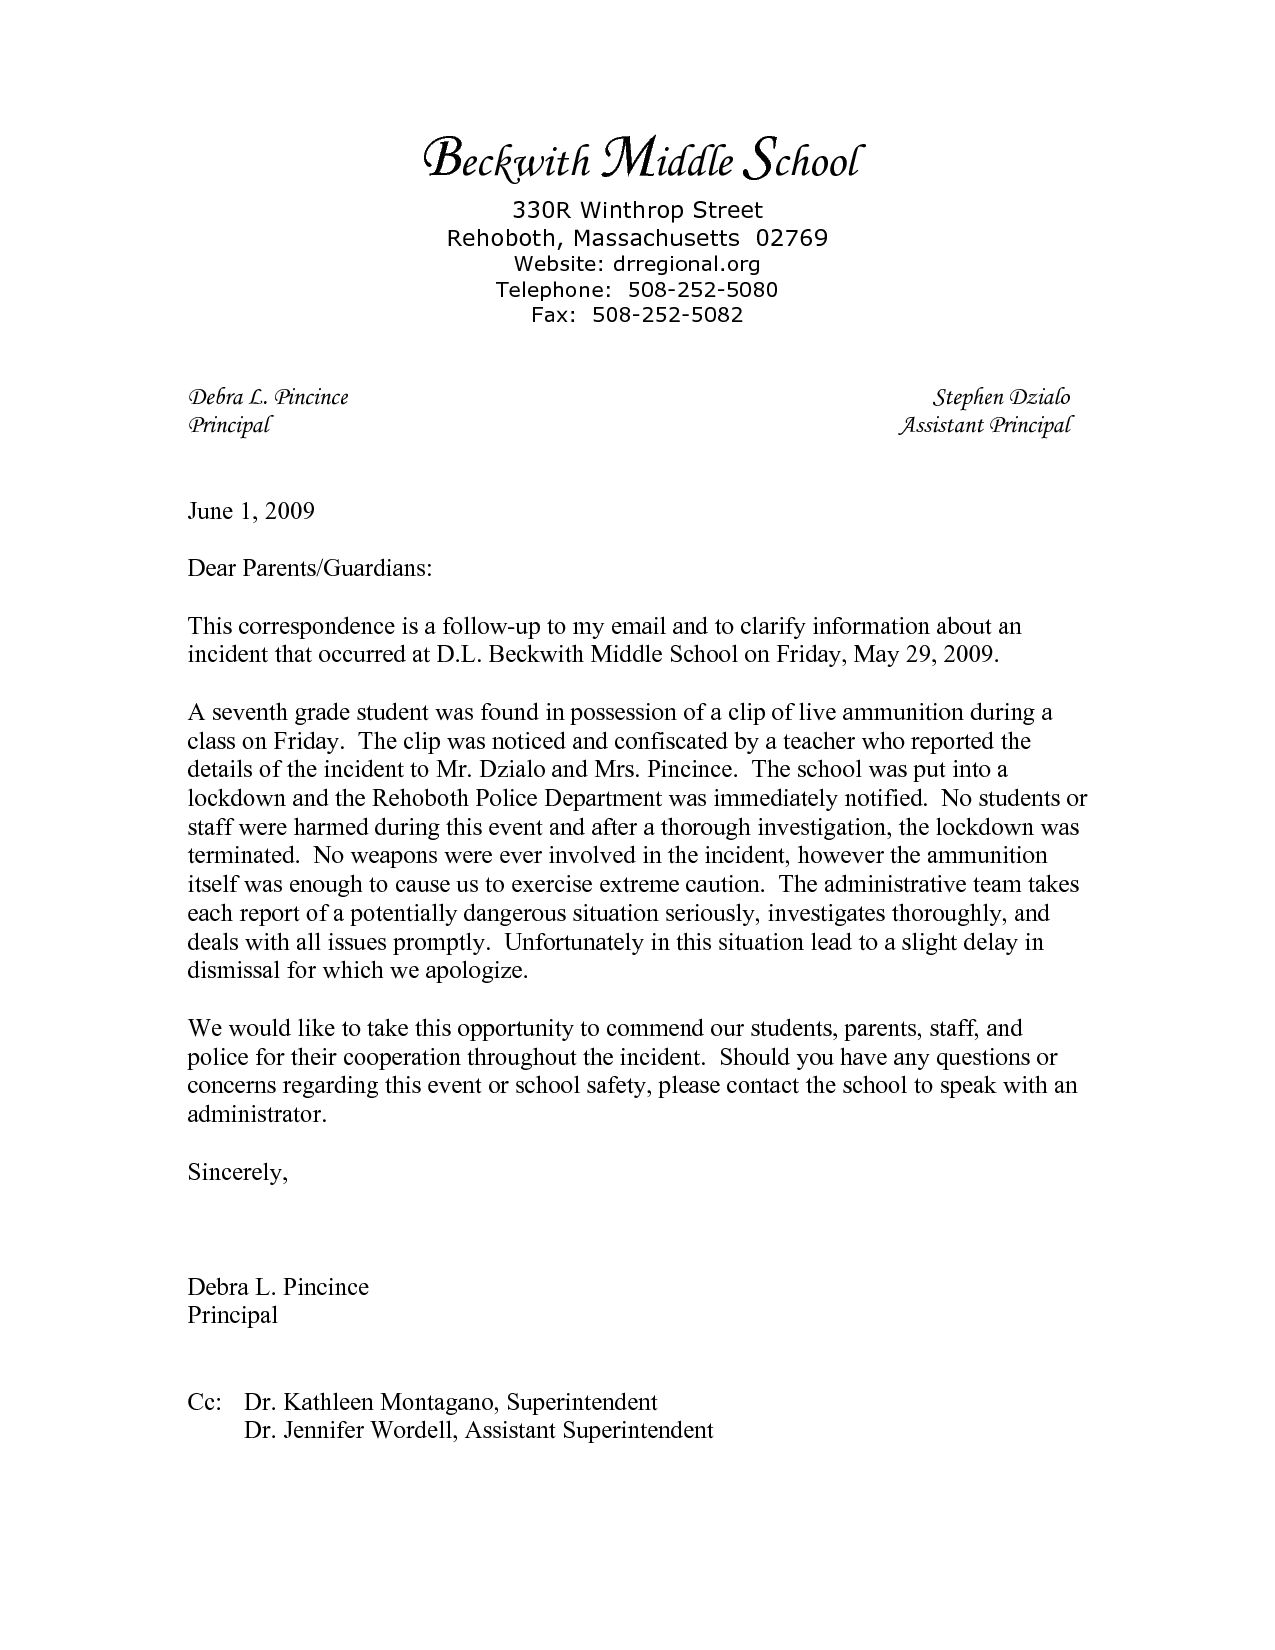 Sample Of Incident Report Letter In School – Yahoo Image For School Incident Report Template